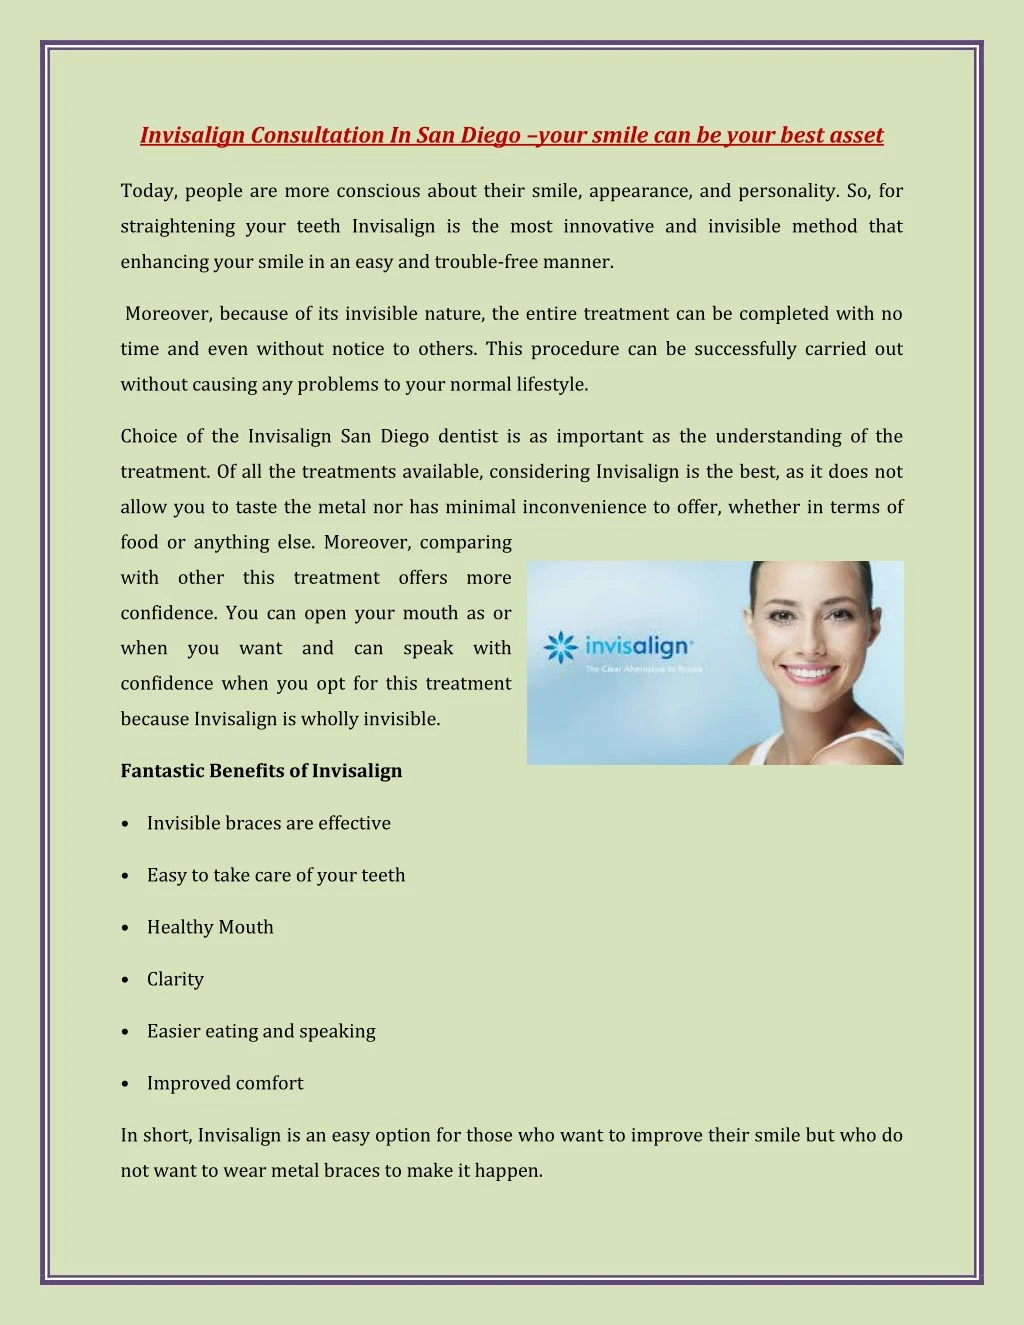 invisalign consultation in san diego your smile